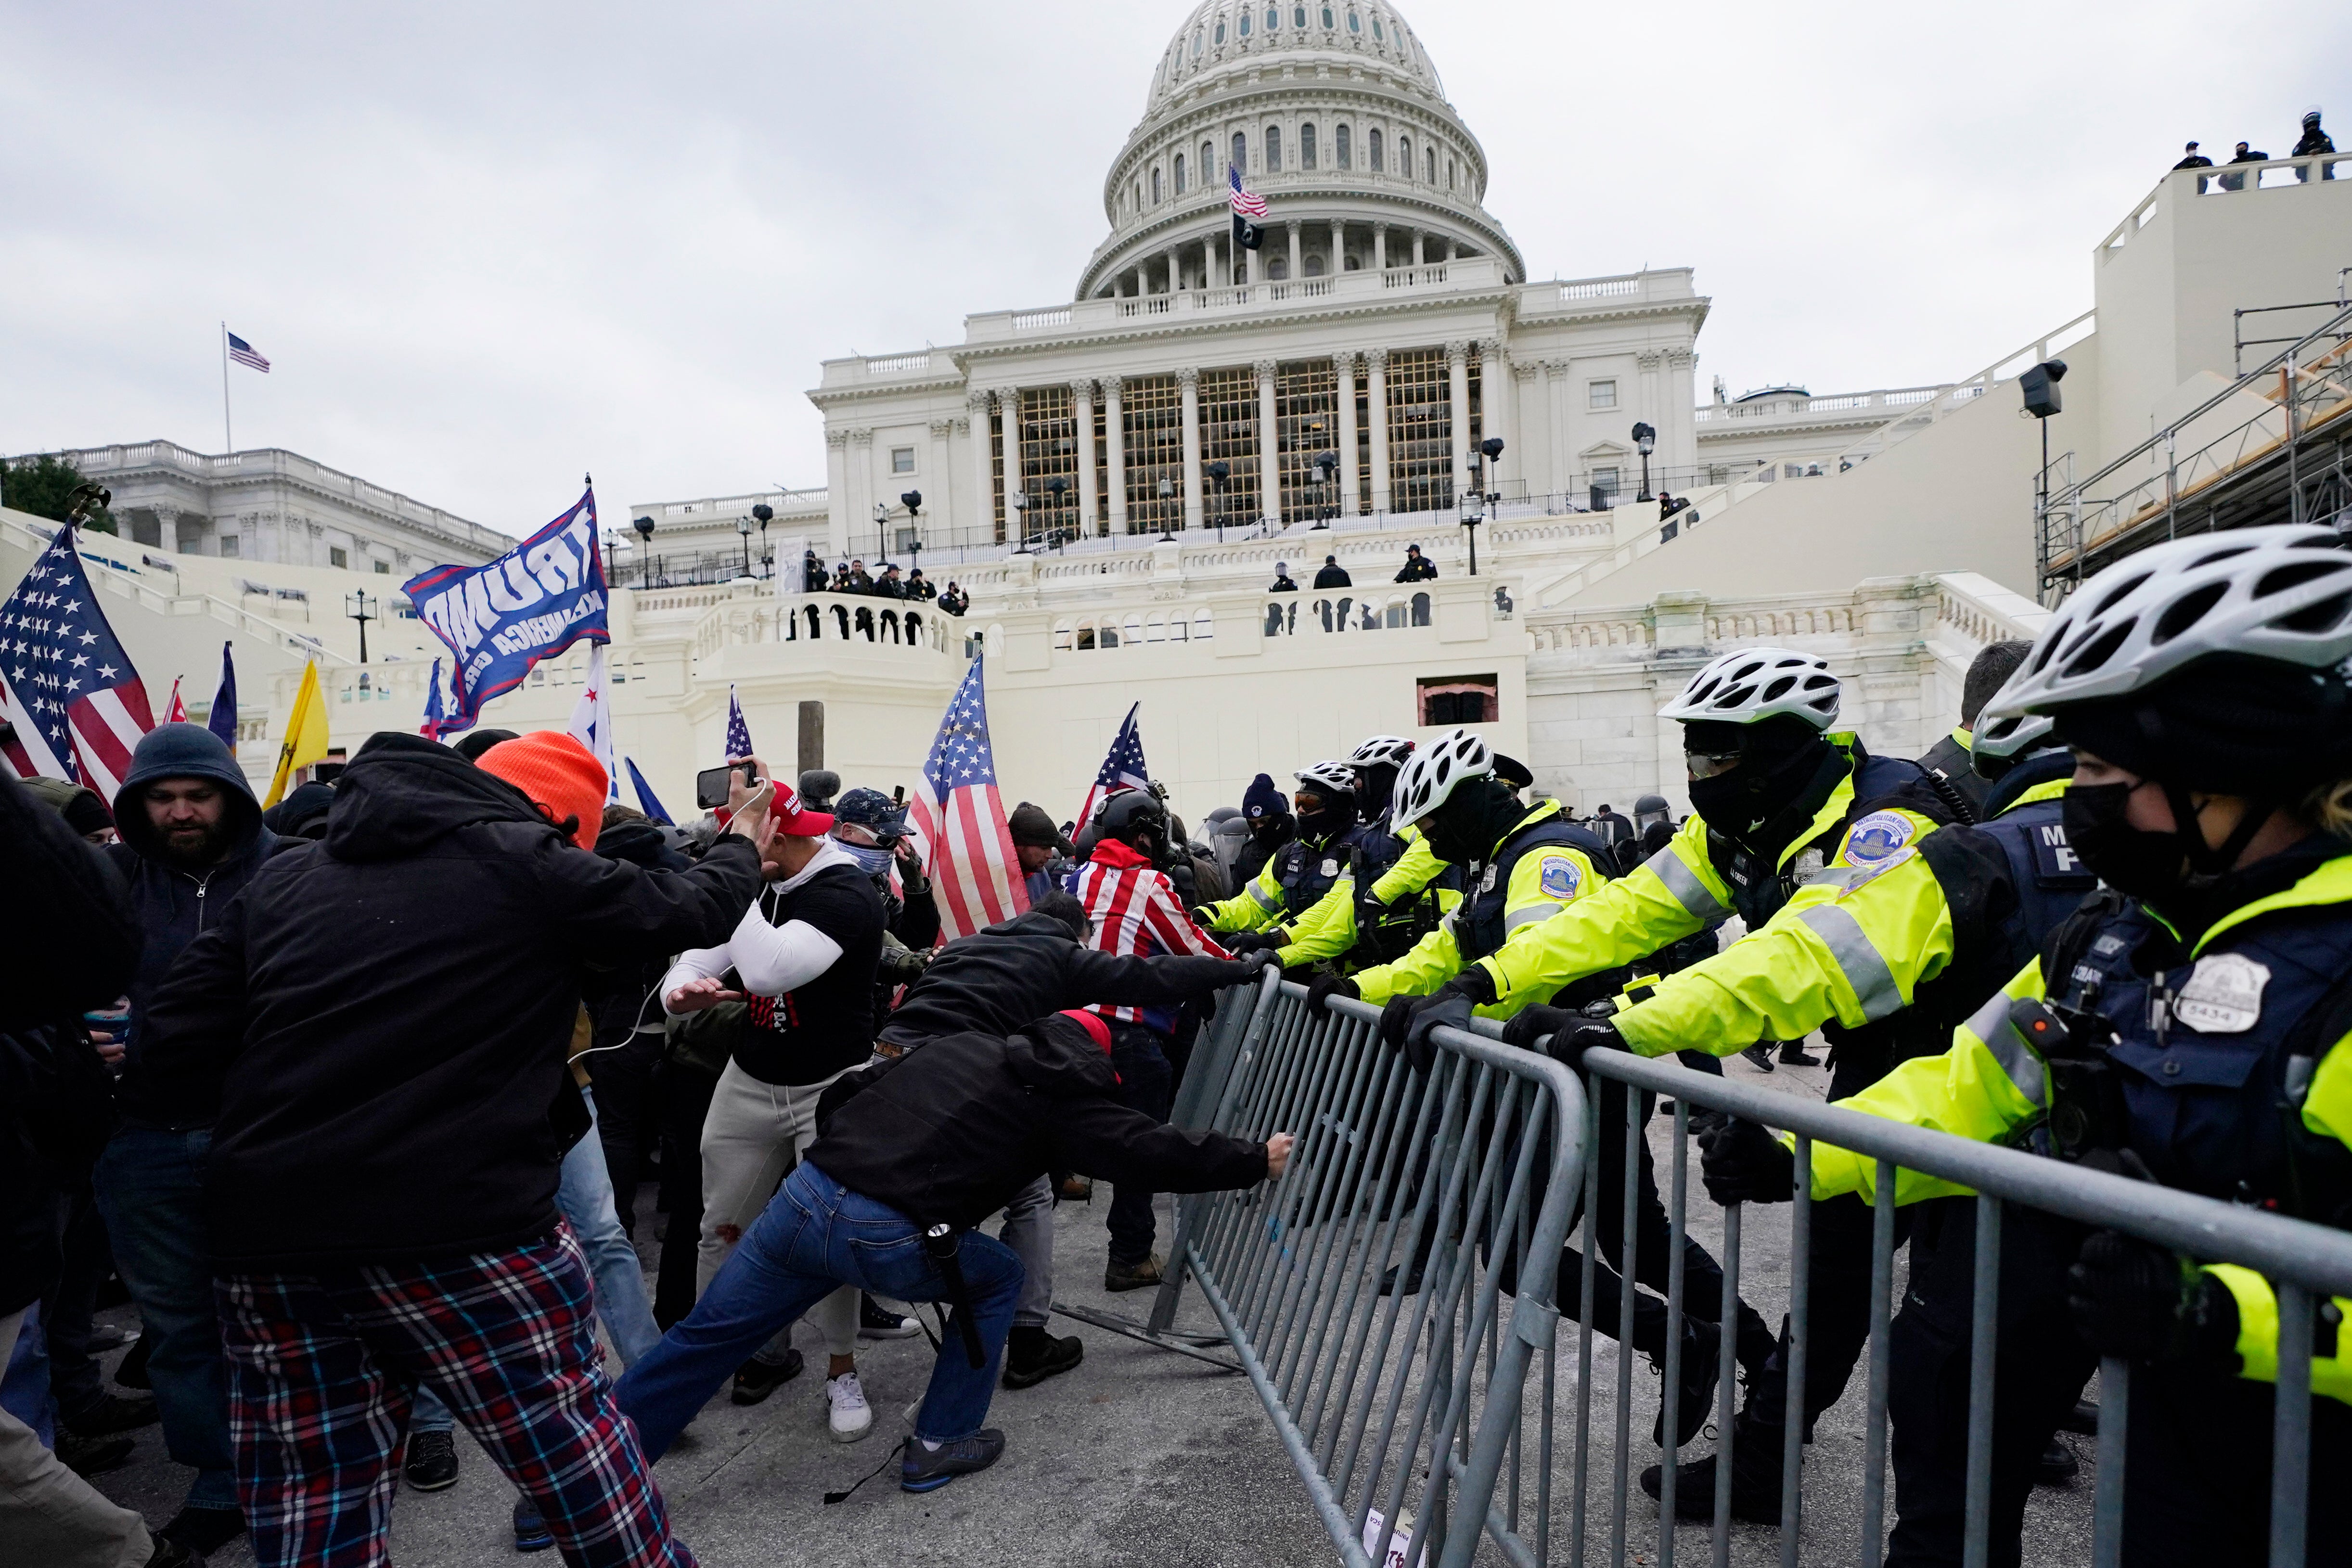 File: In this 6 January 2021 photo, supporters loyal to former president Donald Trump try to break through a police barrier at the Capitol in Washington